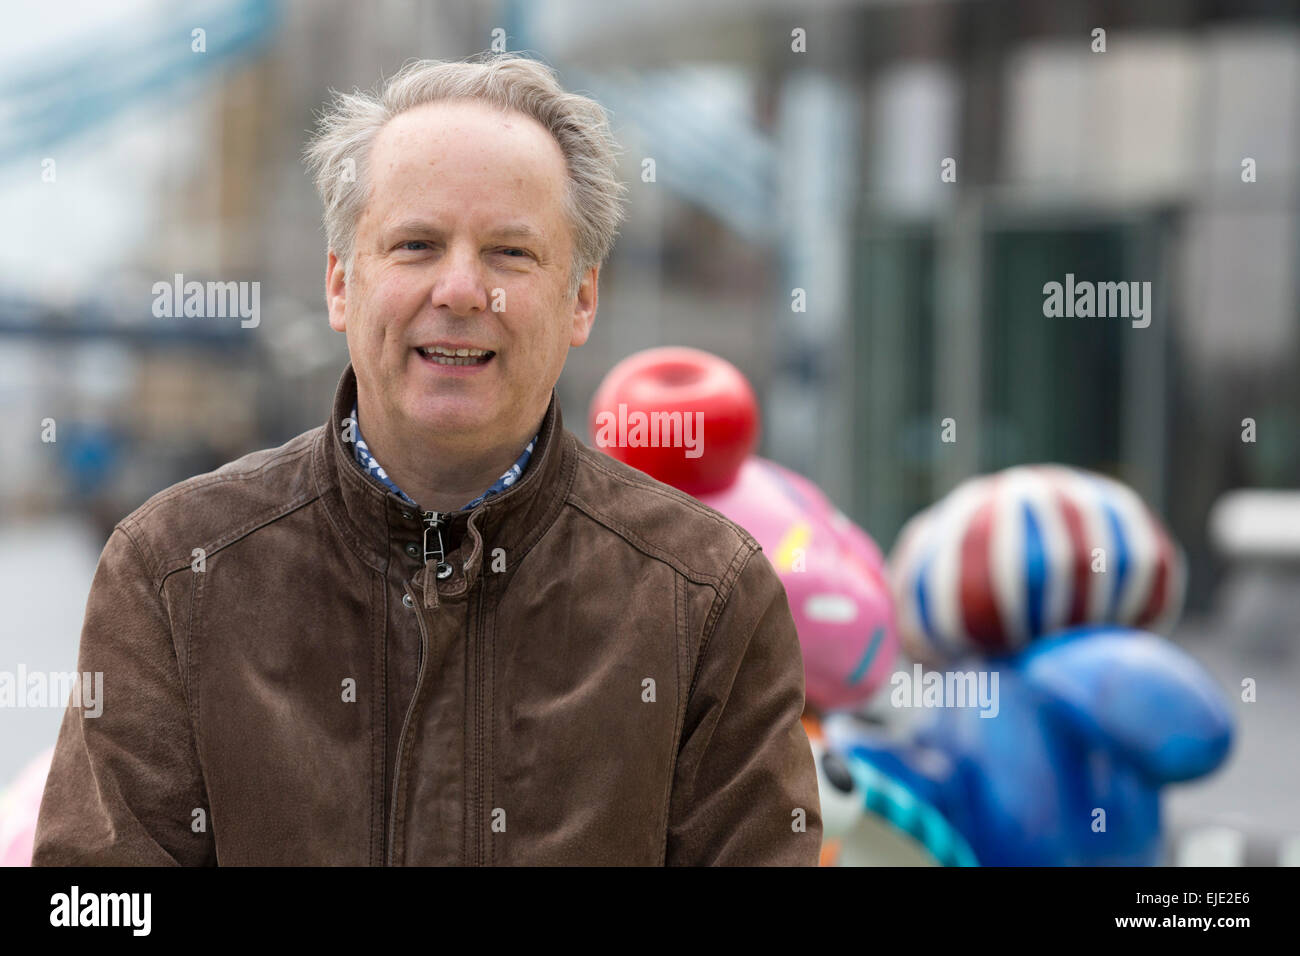 London, UK. 24 March 2015. Animator Nick Park poses with sheep designed by artists and celebrities at the  Shaun in the City London launch. Aardman Animations' 'Shaun the Sheep' are set to be dotted around London from Saturday 28th March to form a special arts trail that will benefit thousands of children in hospitals around the UK. The sculptures have been designed by high profile artists, designers and celebrities including David Gandy, Zayn Malik, Zandra Rhodes and Cath Kidston and will be auctioned after the exhibition finishes on 25th May. Photo: Bettina Strenske Stock Photo